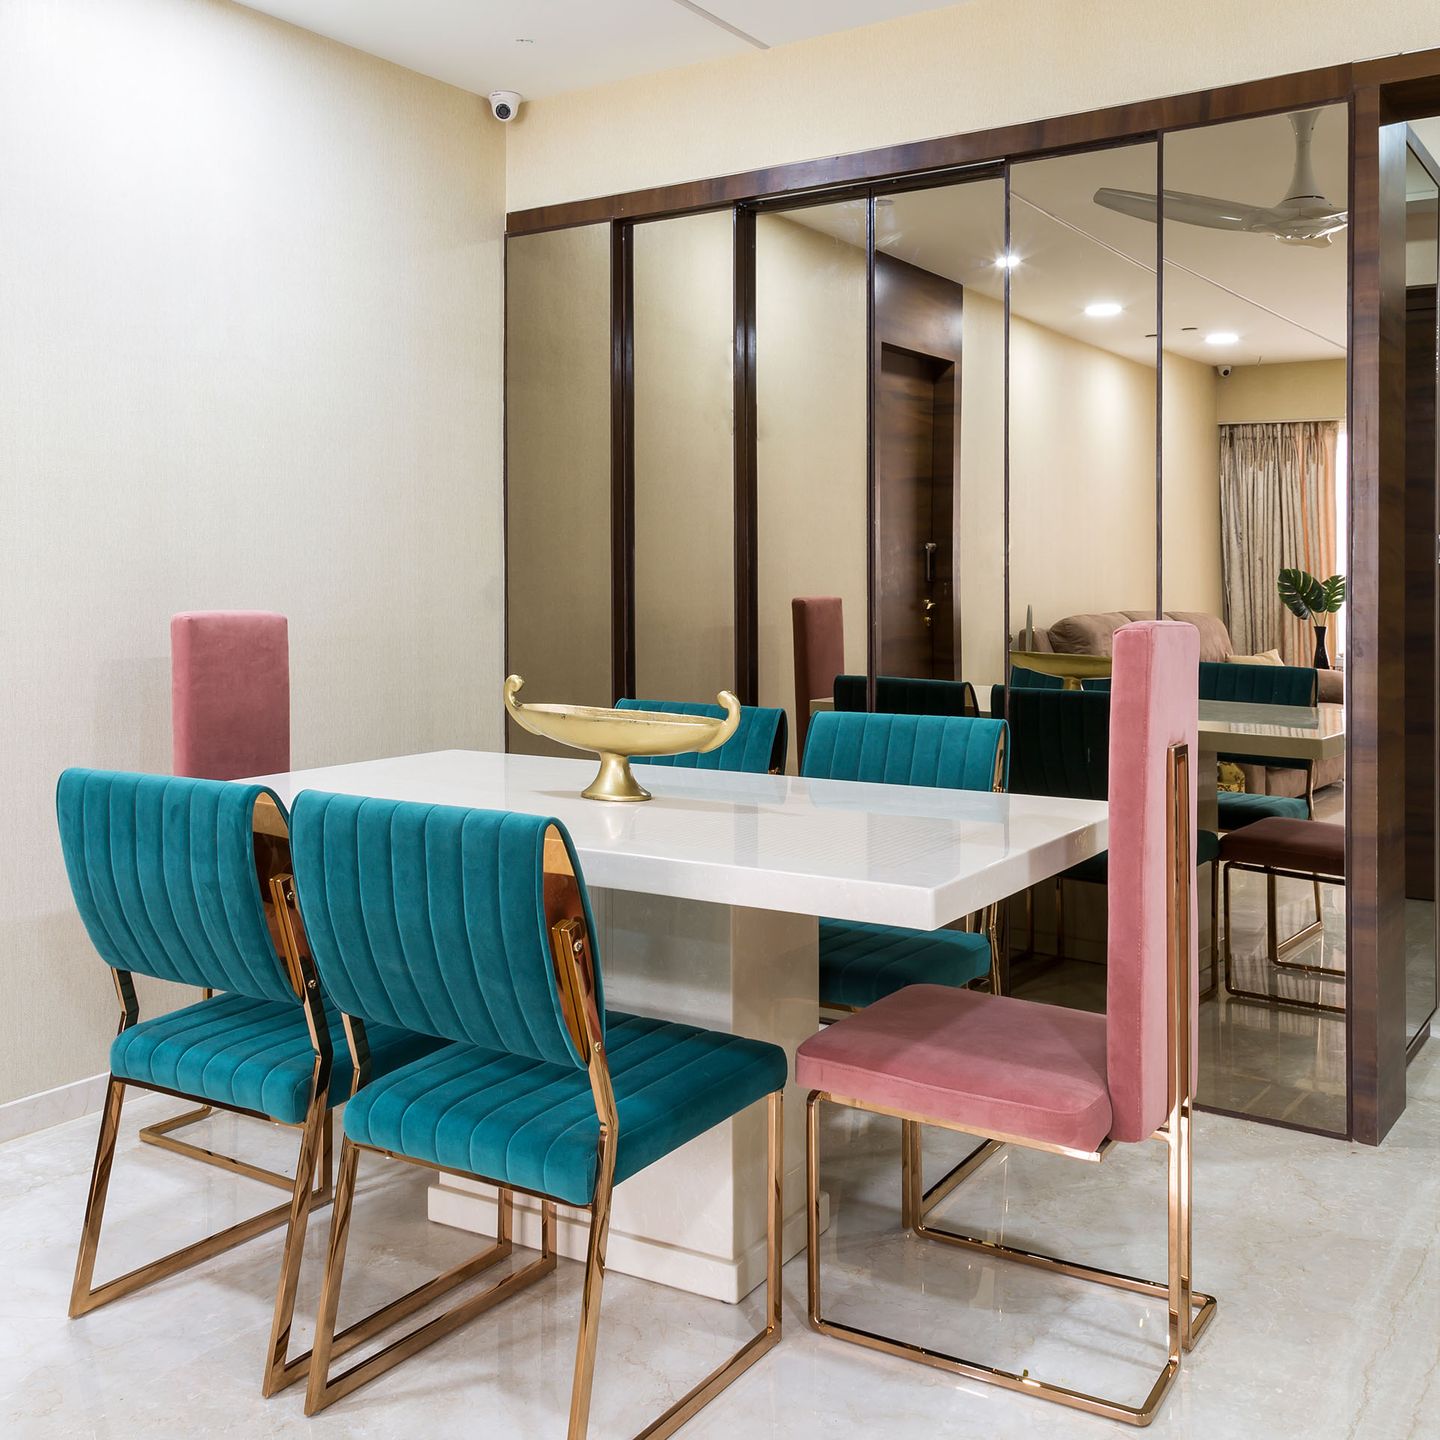 Dining Room Design With Teal Blue And Pink Chairs - Livspace